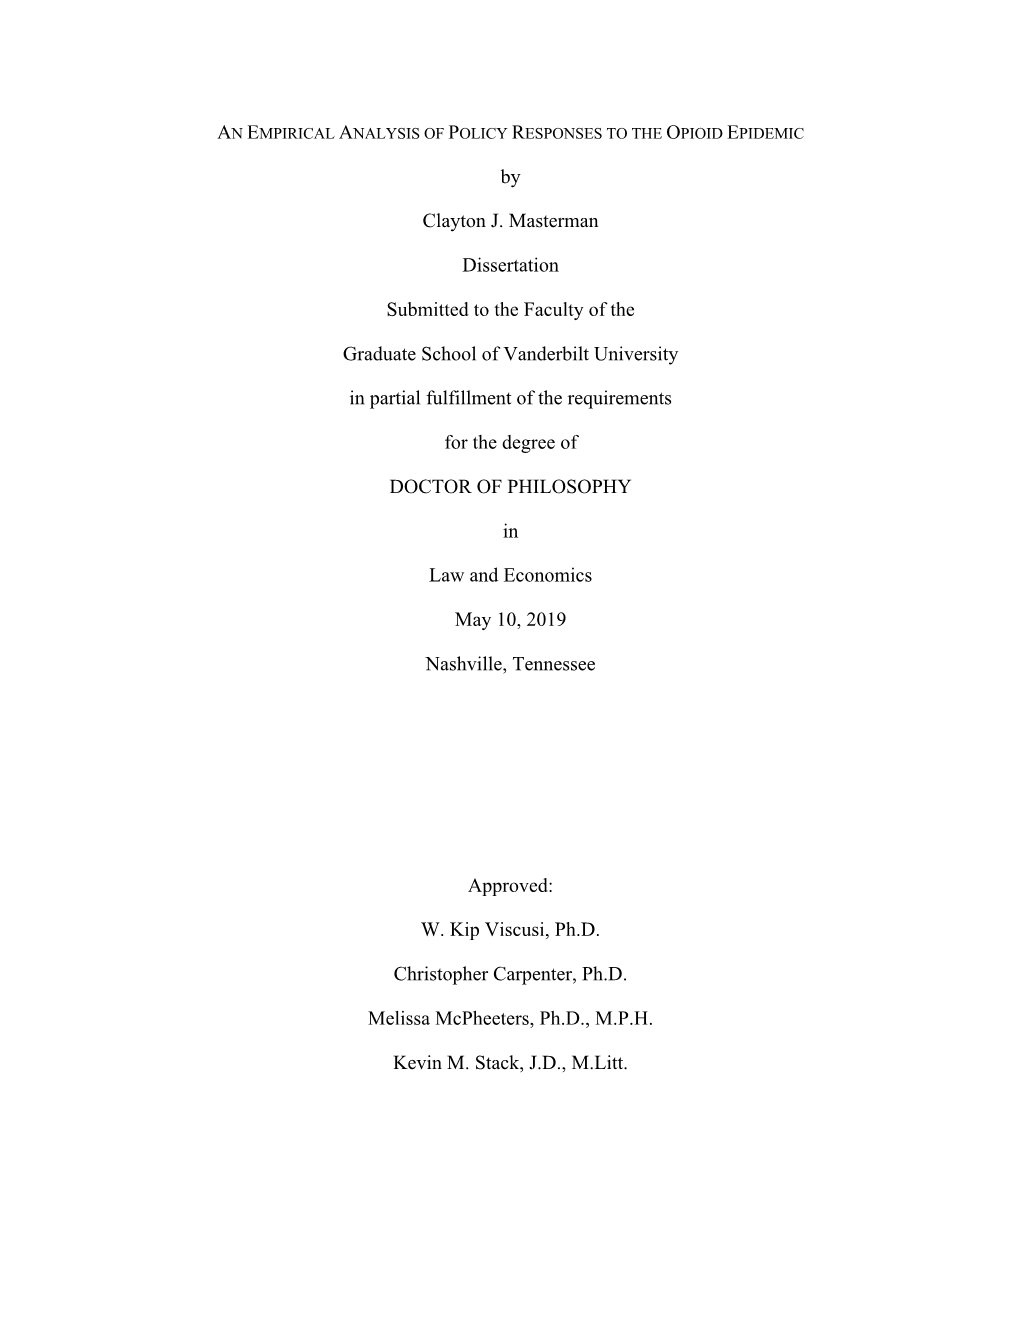 By Clayton J. Masterman Dissertation Submitted to the Faculty of The